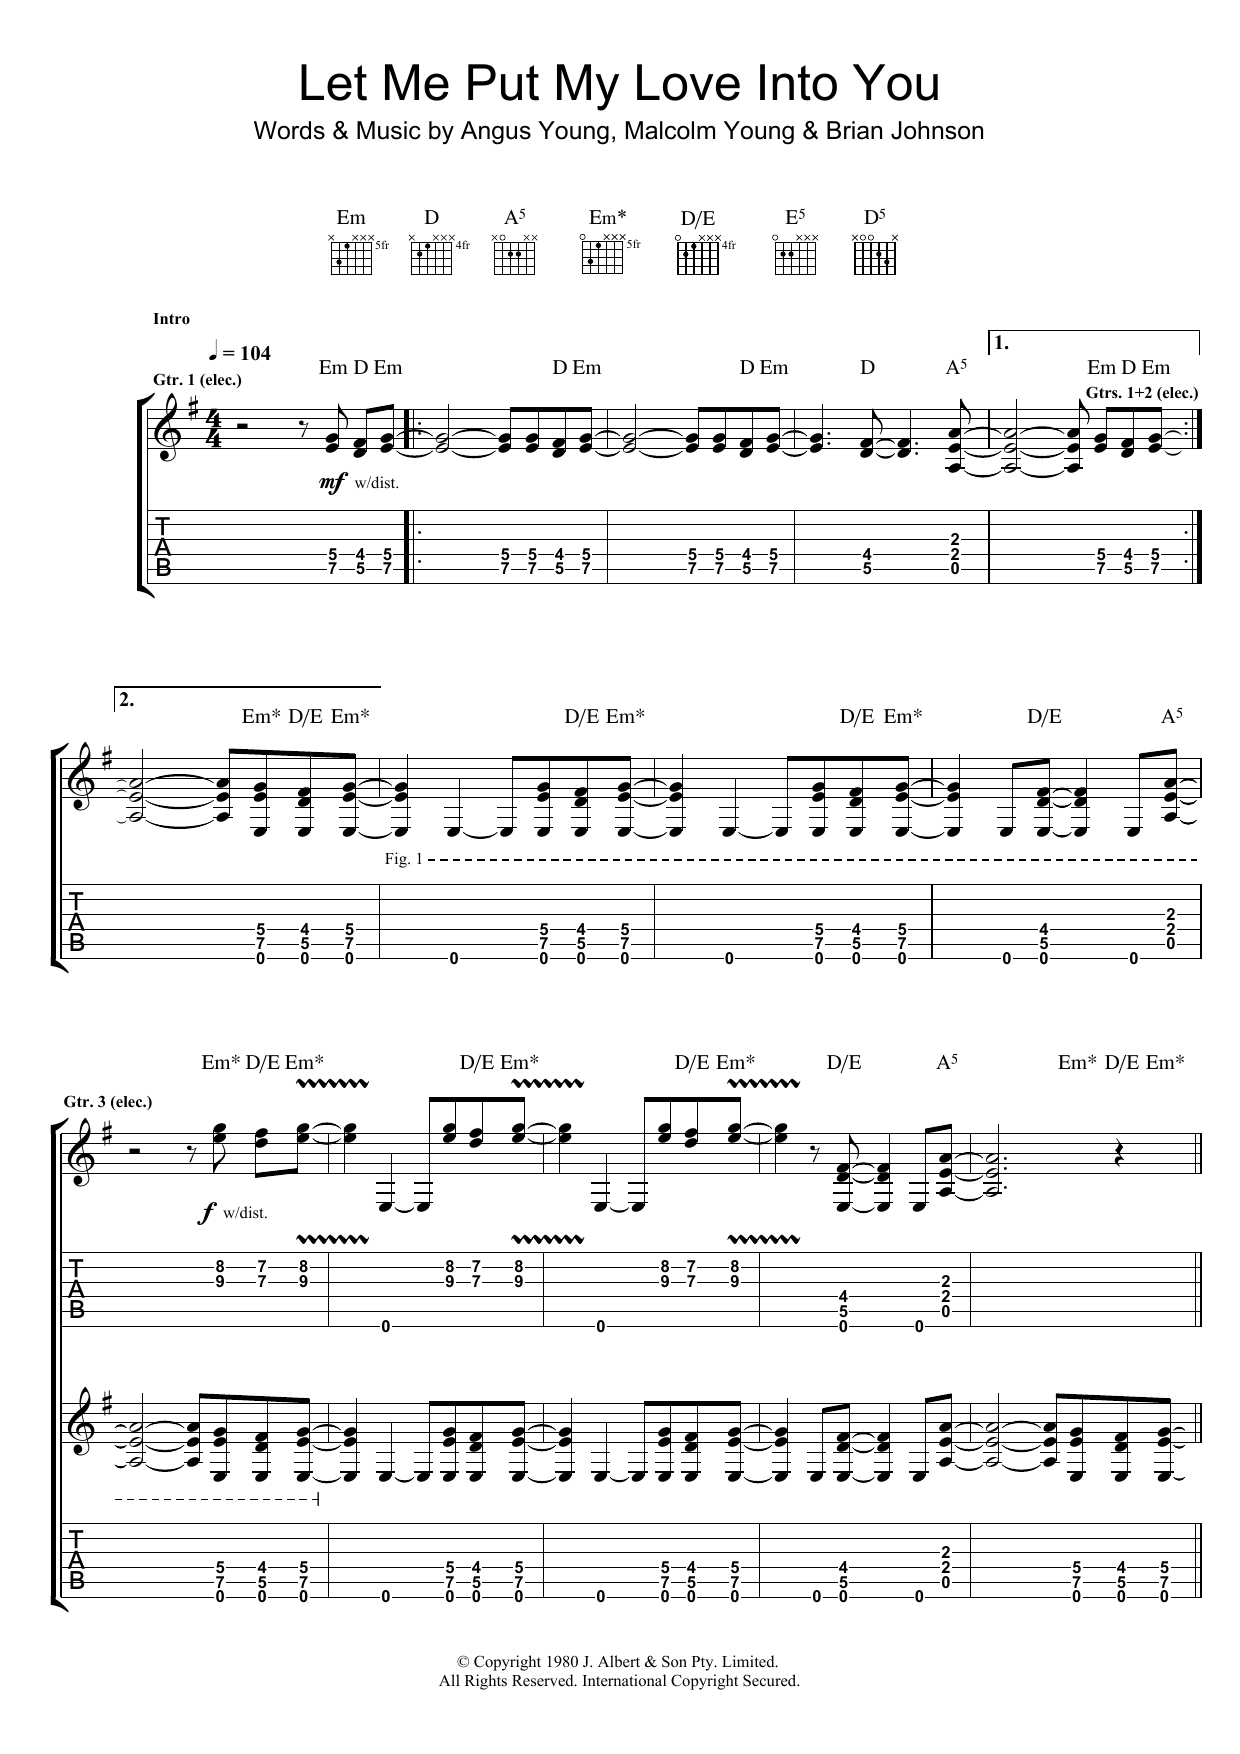 Download AC/DC Let Me Put My Love Into You Sheet Music